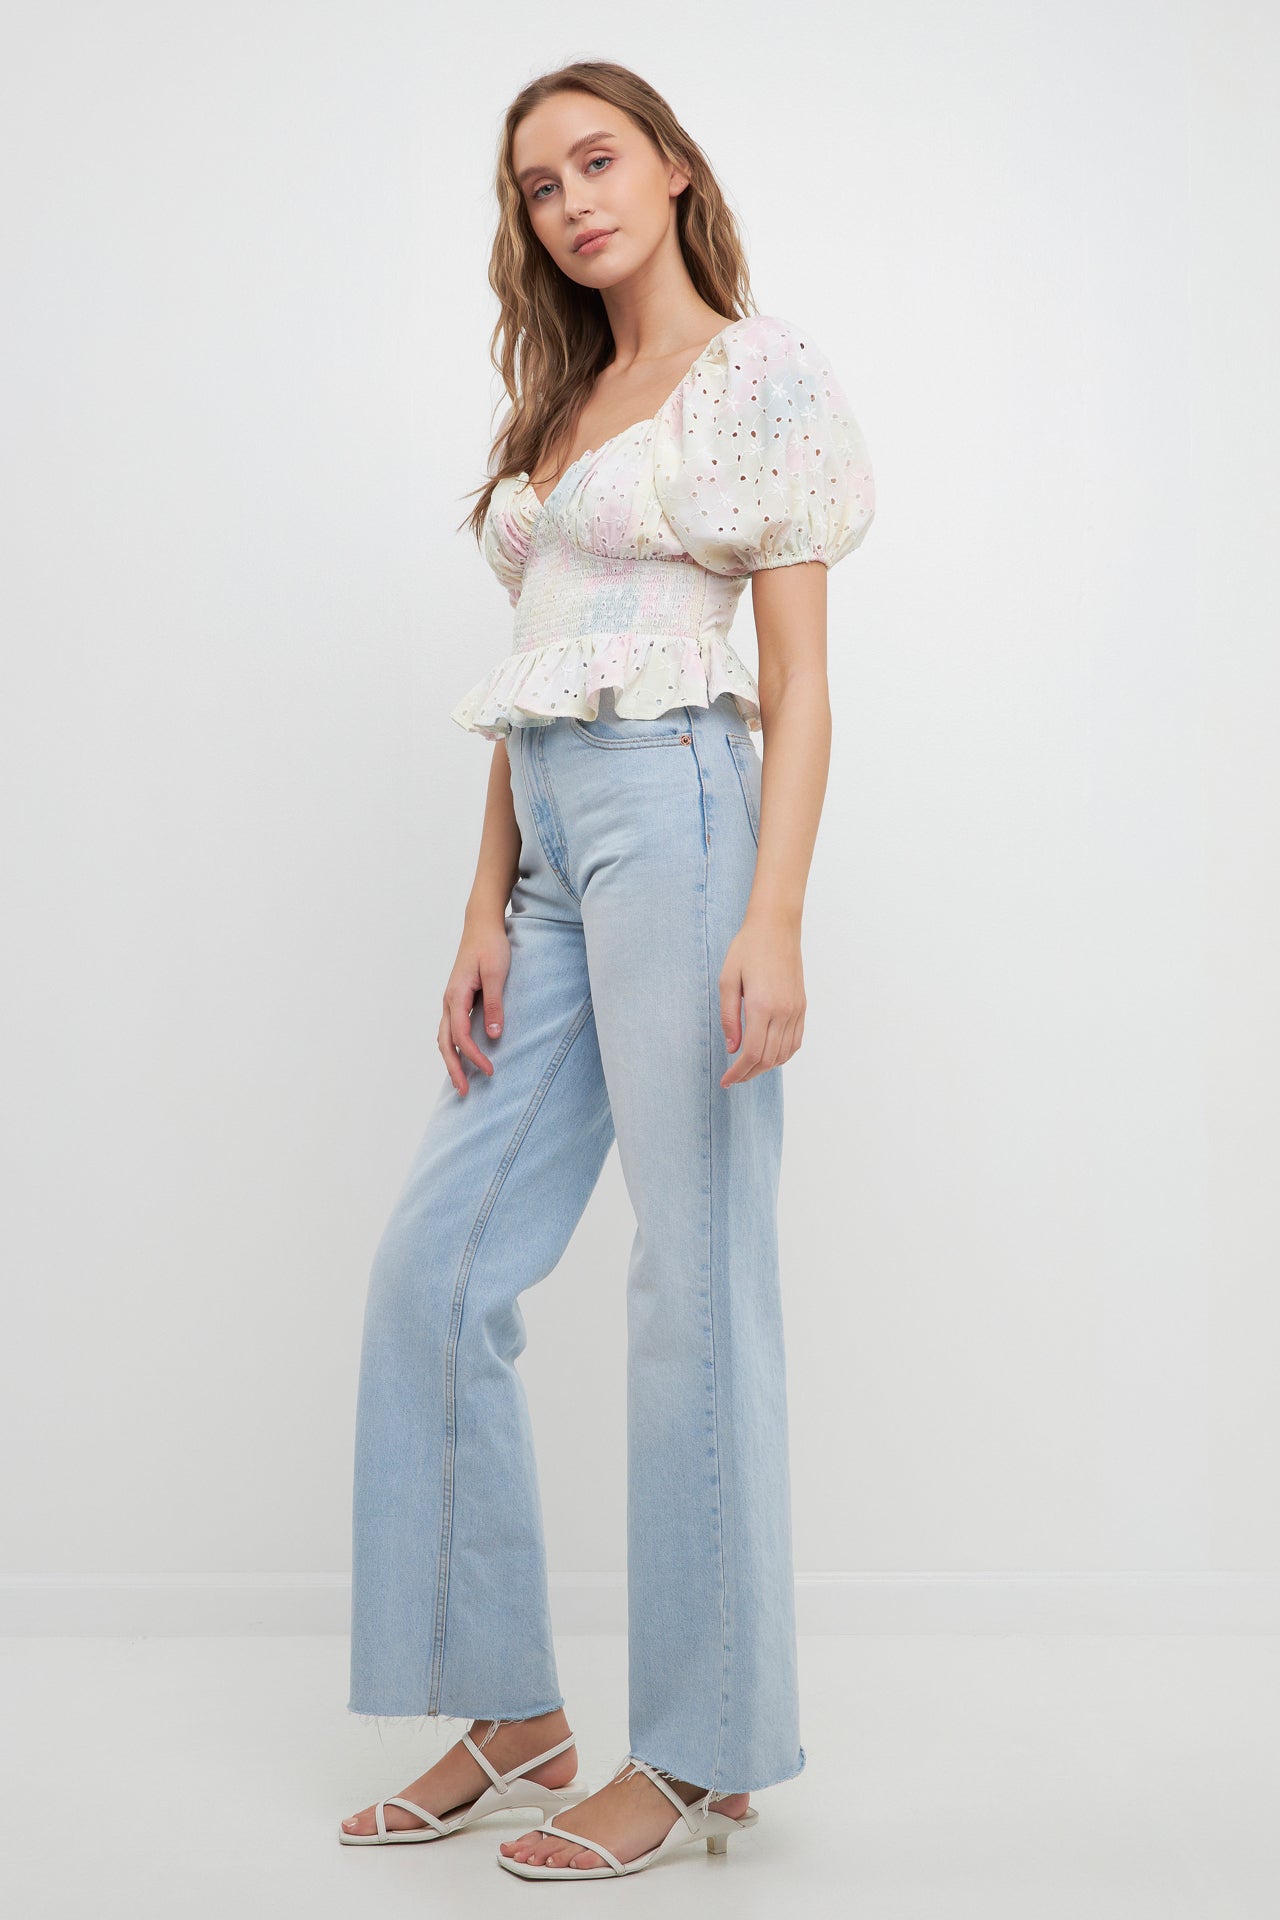 FREE THE ROSES - Embroidered Tie-dye Smocked Top - TOPS available at Objectrare